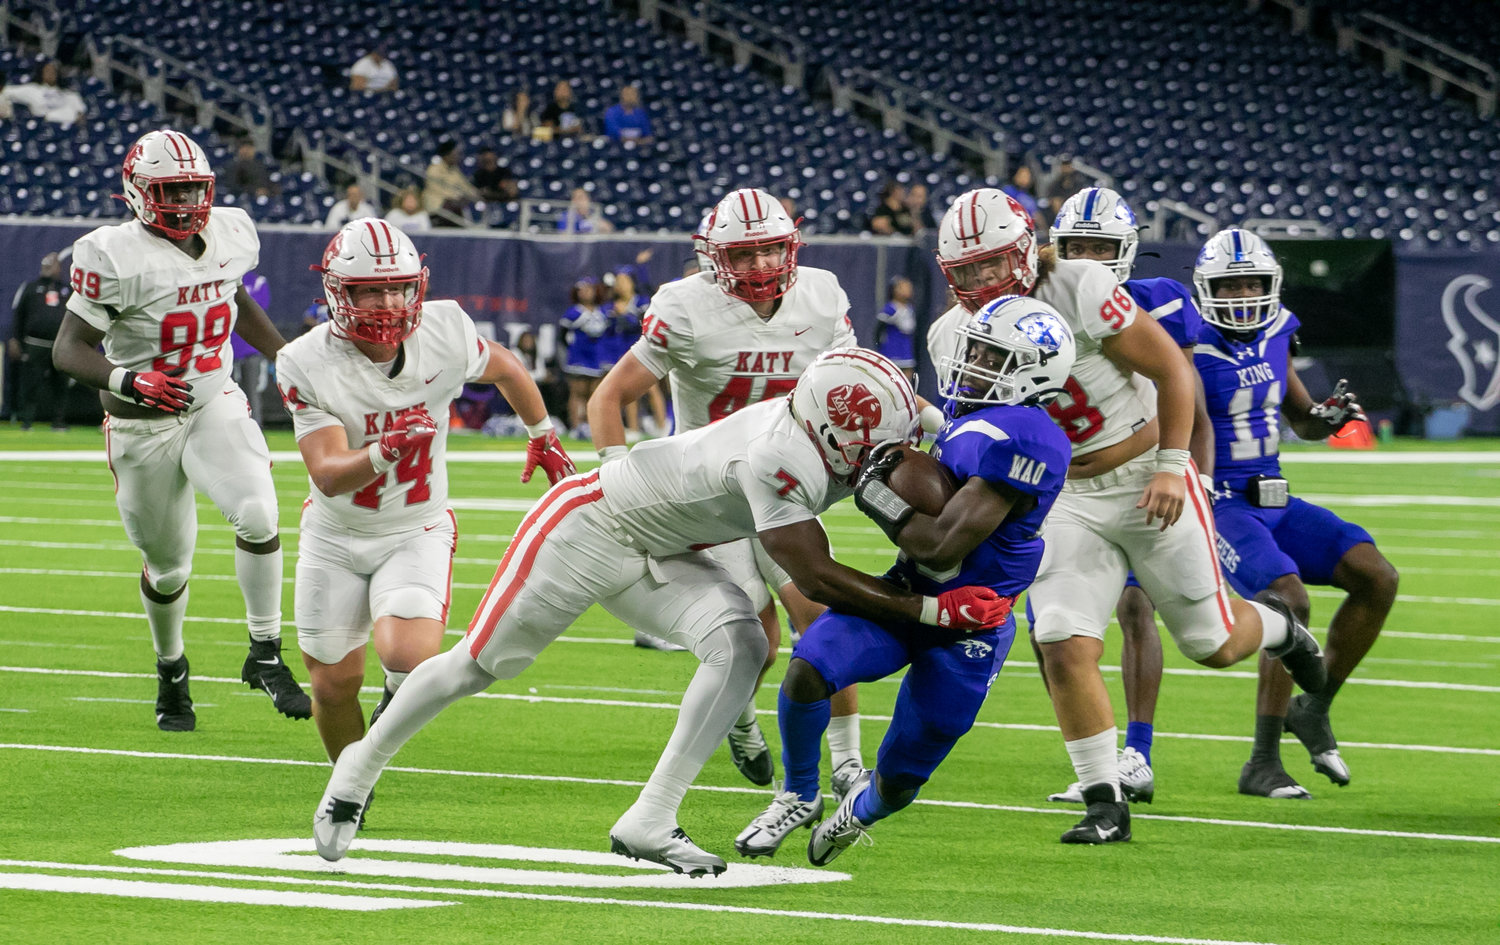 Katy's Johnathan Hall makes a tackle during Friday's Class 6A-Division II Region III Final between Katy and C.E. King at NRG Stadium.